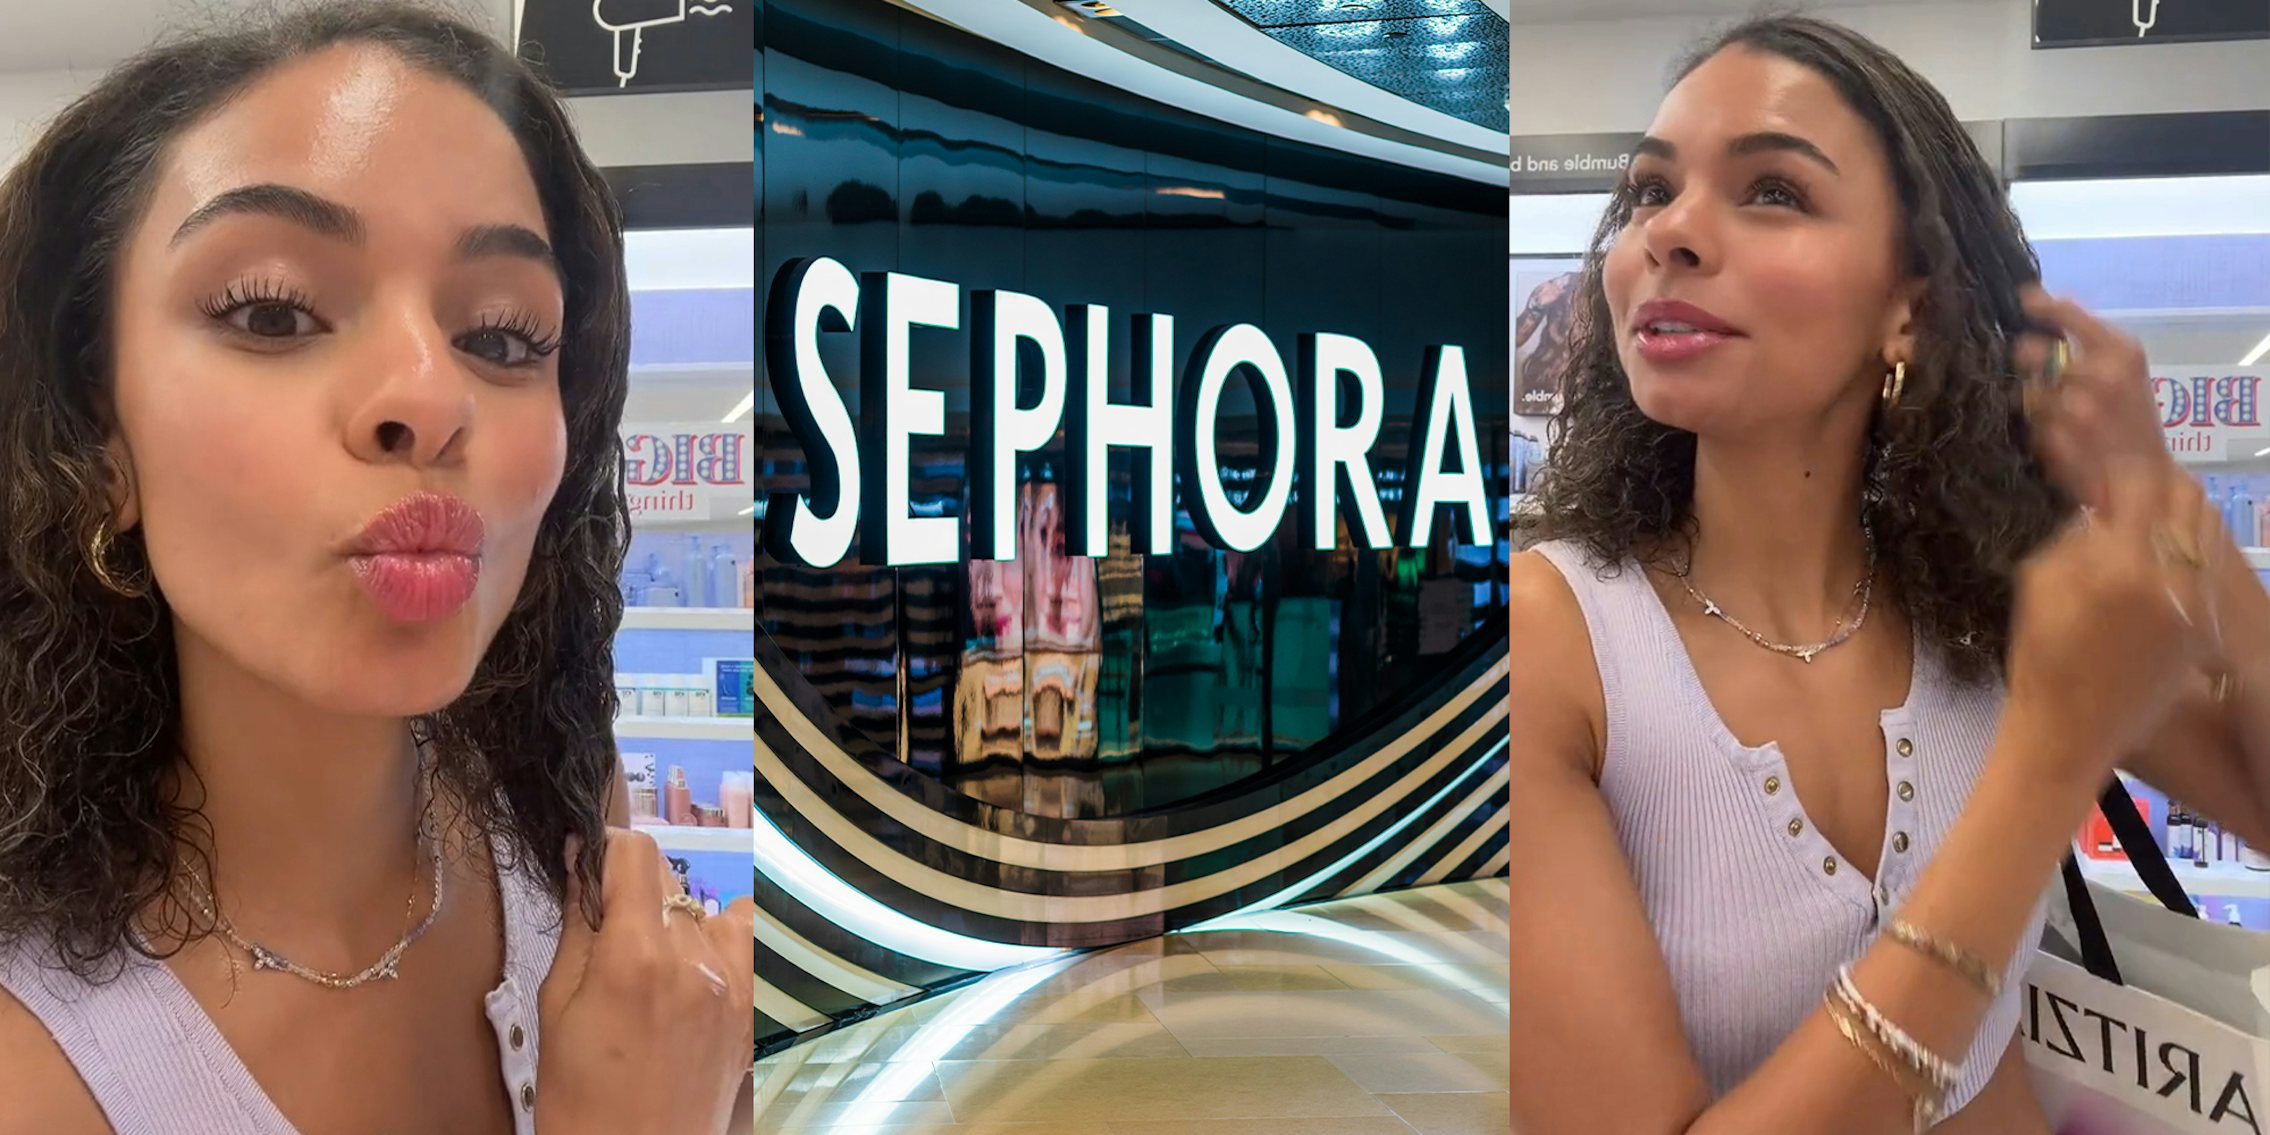 Shopper says she 'gets ready' at Sephora, tries every sample product